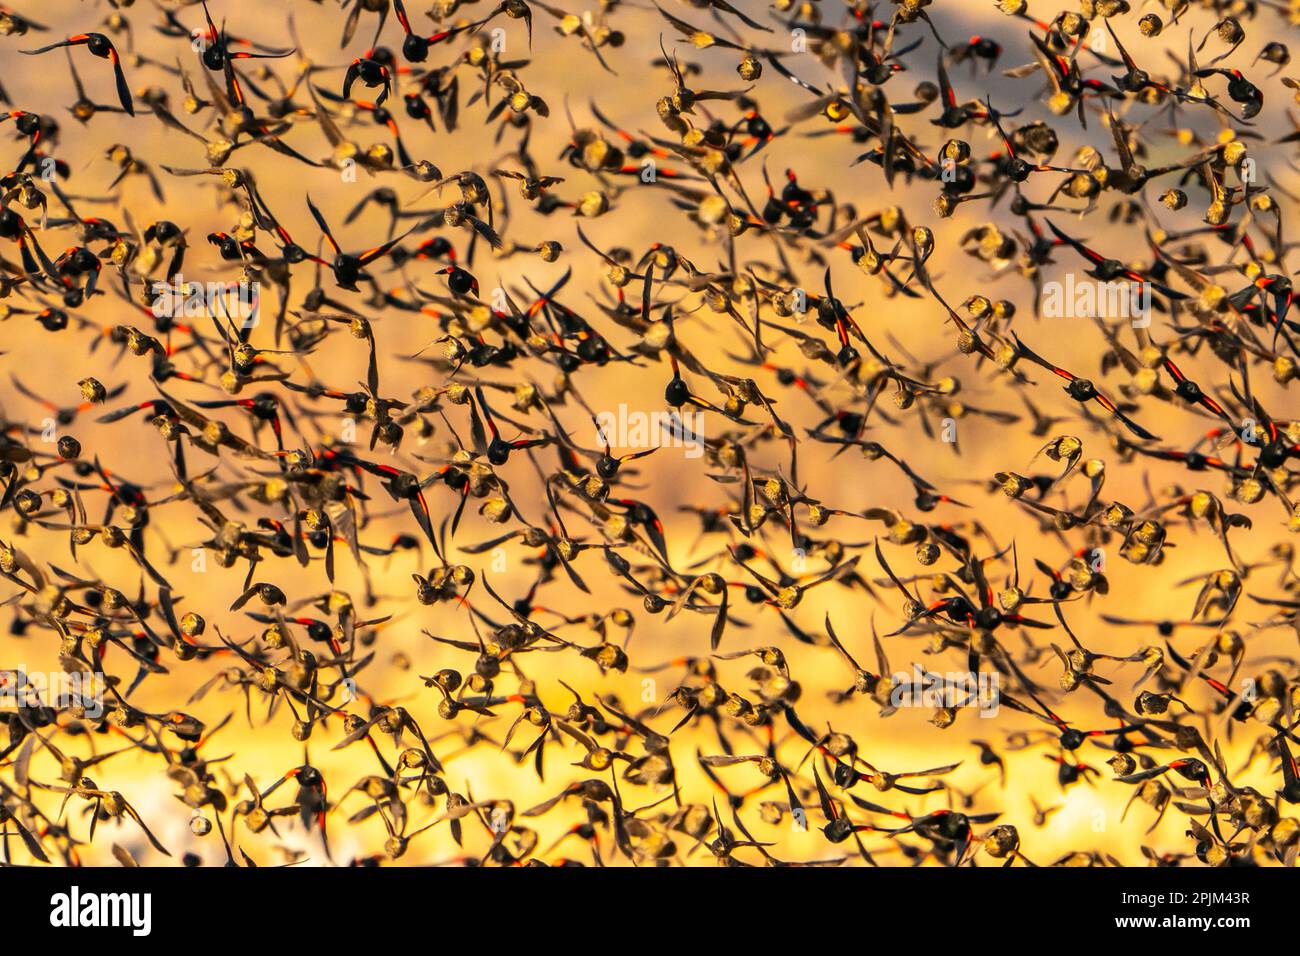 USA, New Mexico, Bosque Del Apache National Wildlife Refuge. Red-winged blackbird flock flying. Stock Photo